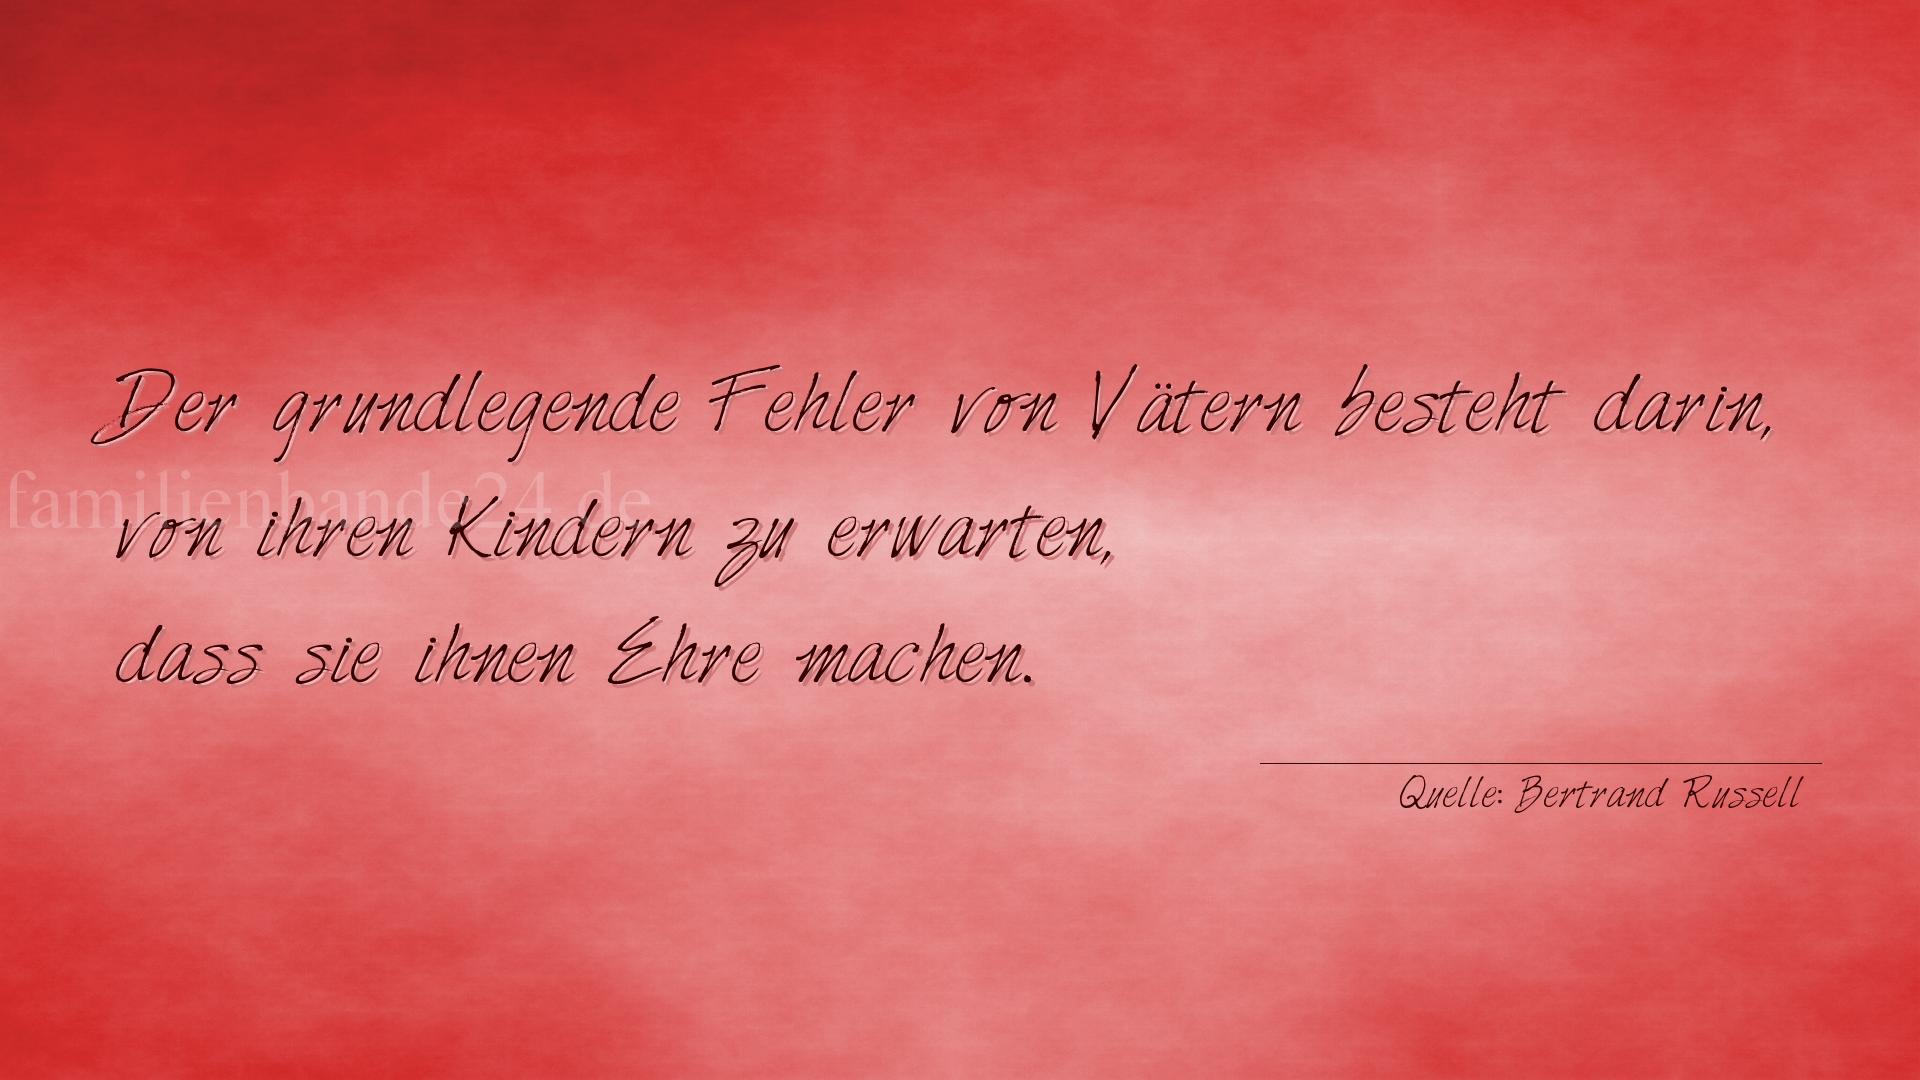 Familienspruch Nr. 349, Quelle Bertrand Russell